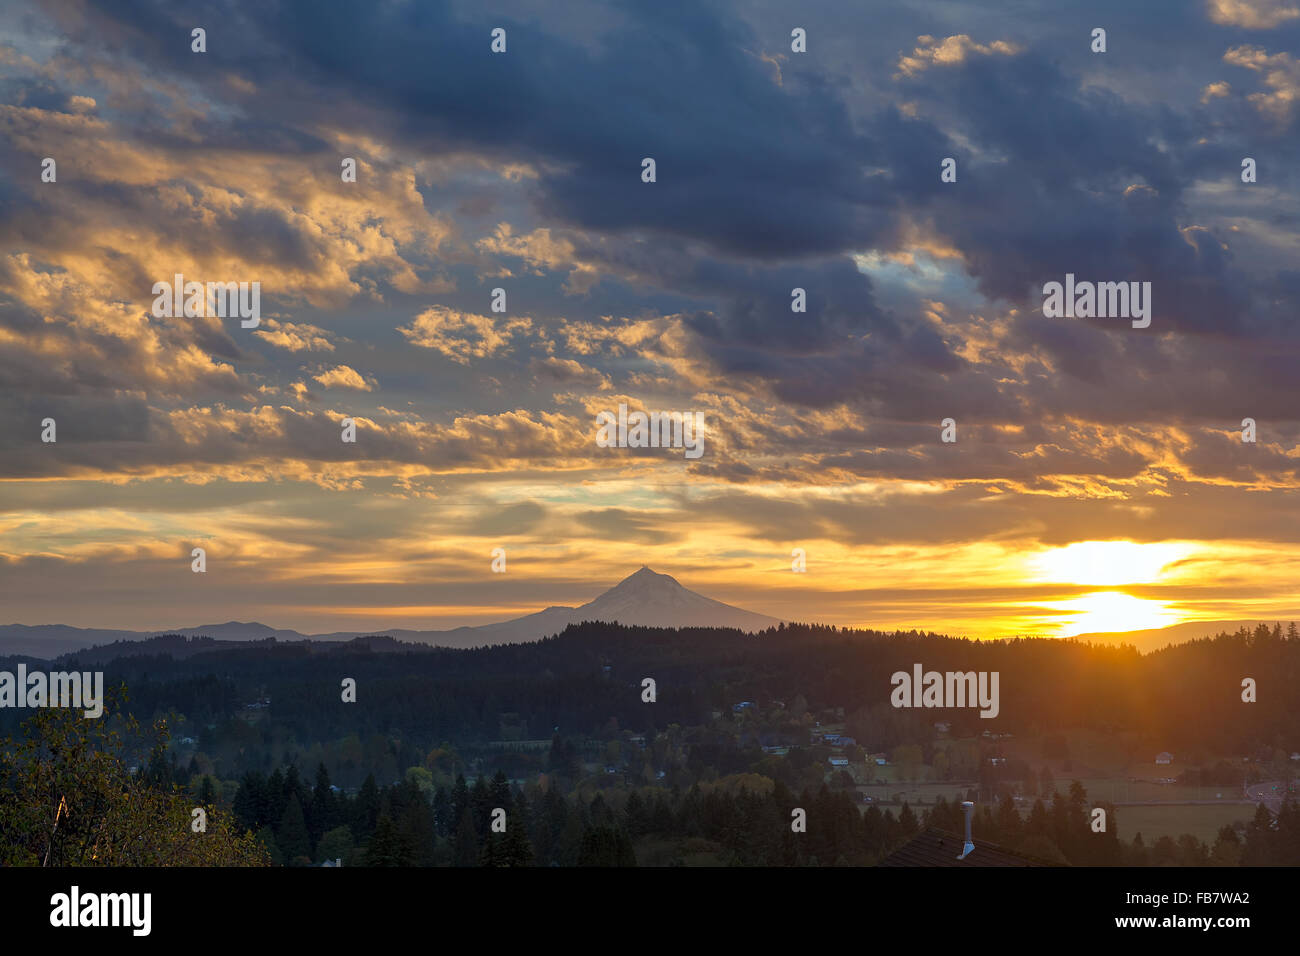 Sunrise Over Mt Hood View from Scenic Happy Valley Oregon Stock Photo